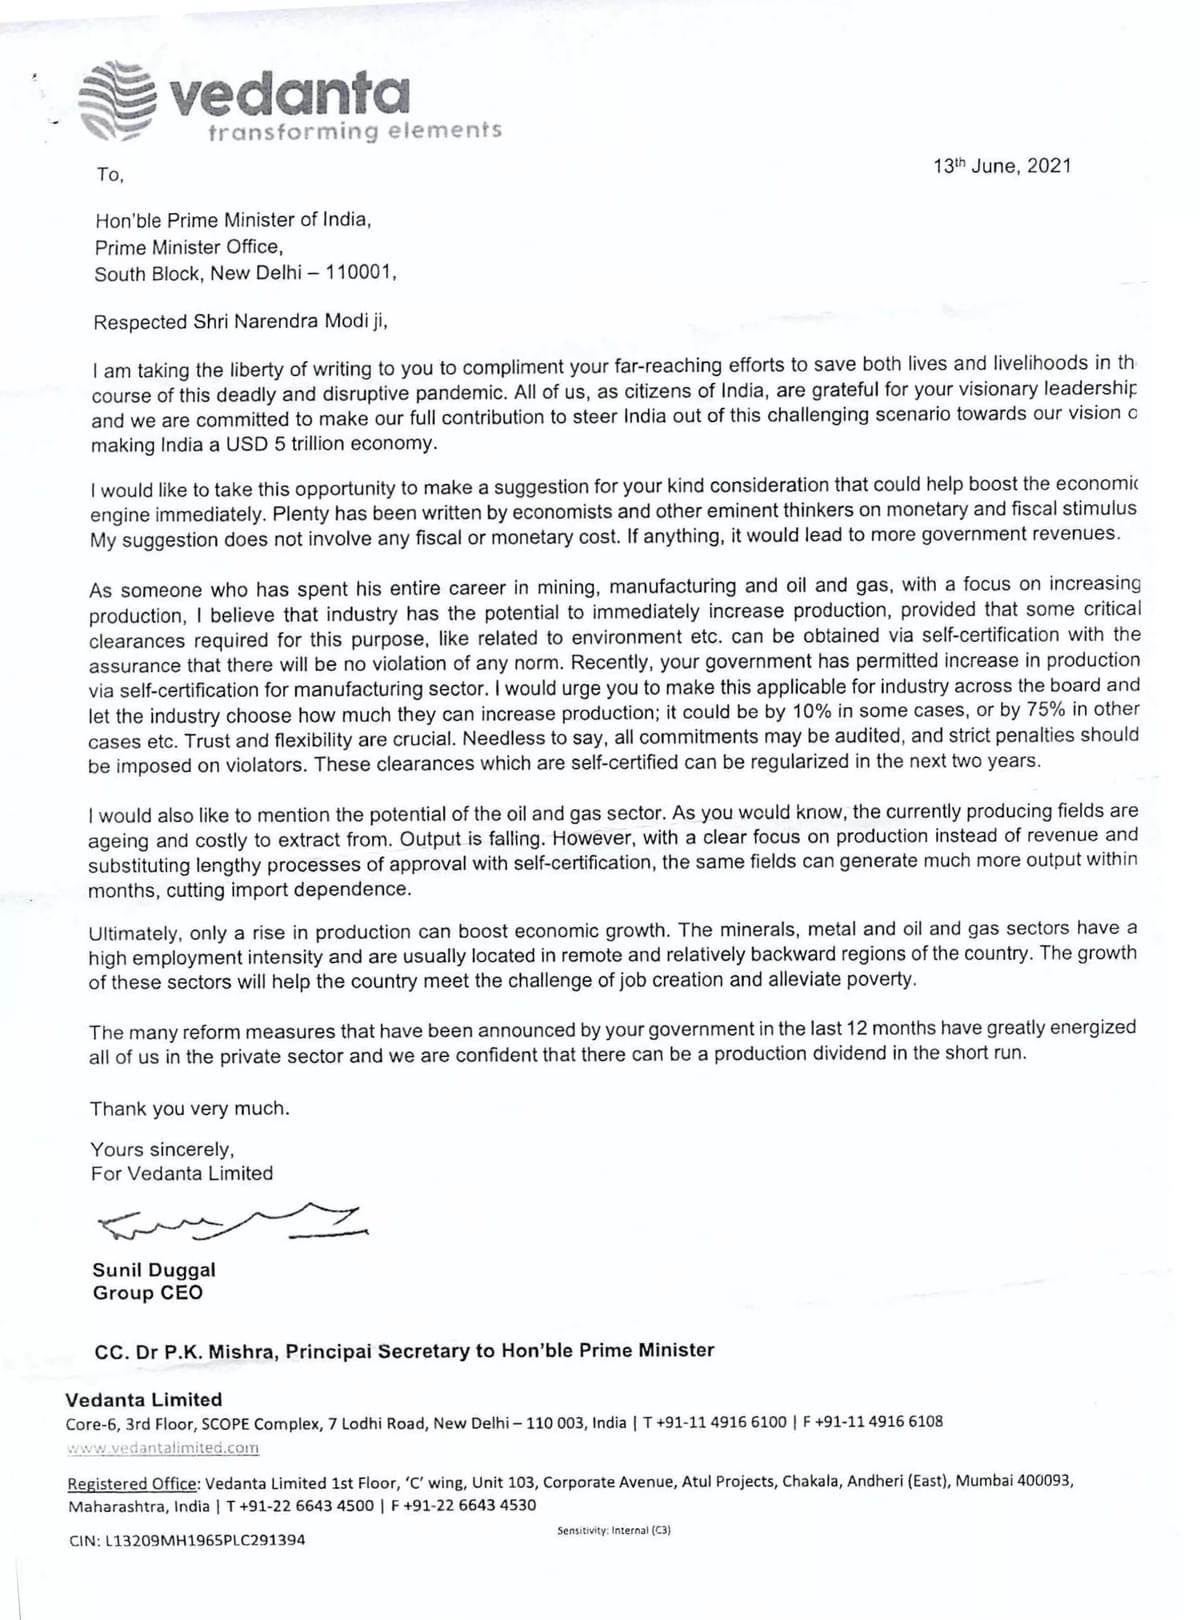 investigations/vedanta-ceo-letter-page4.jpg